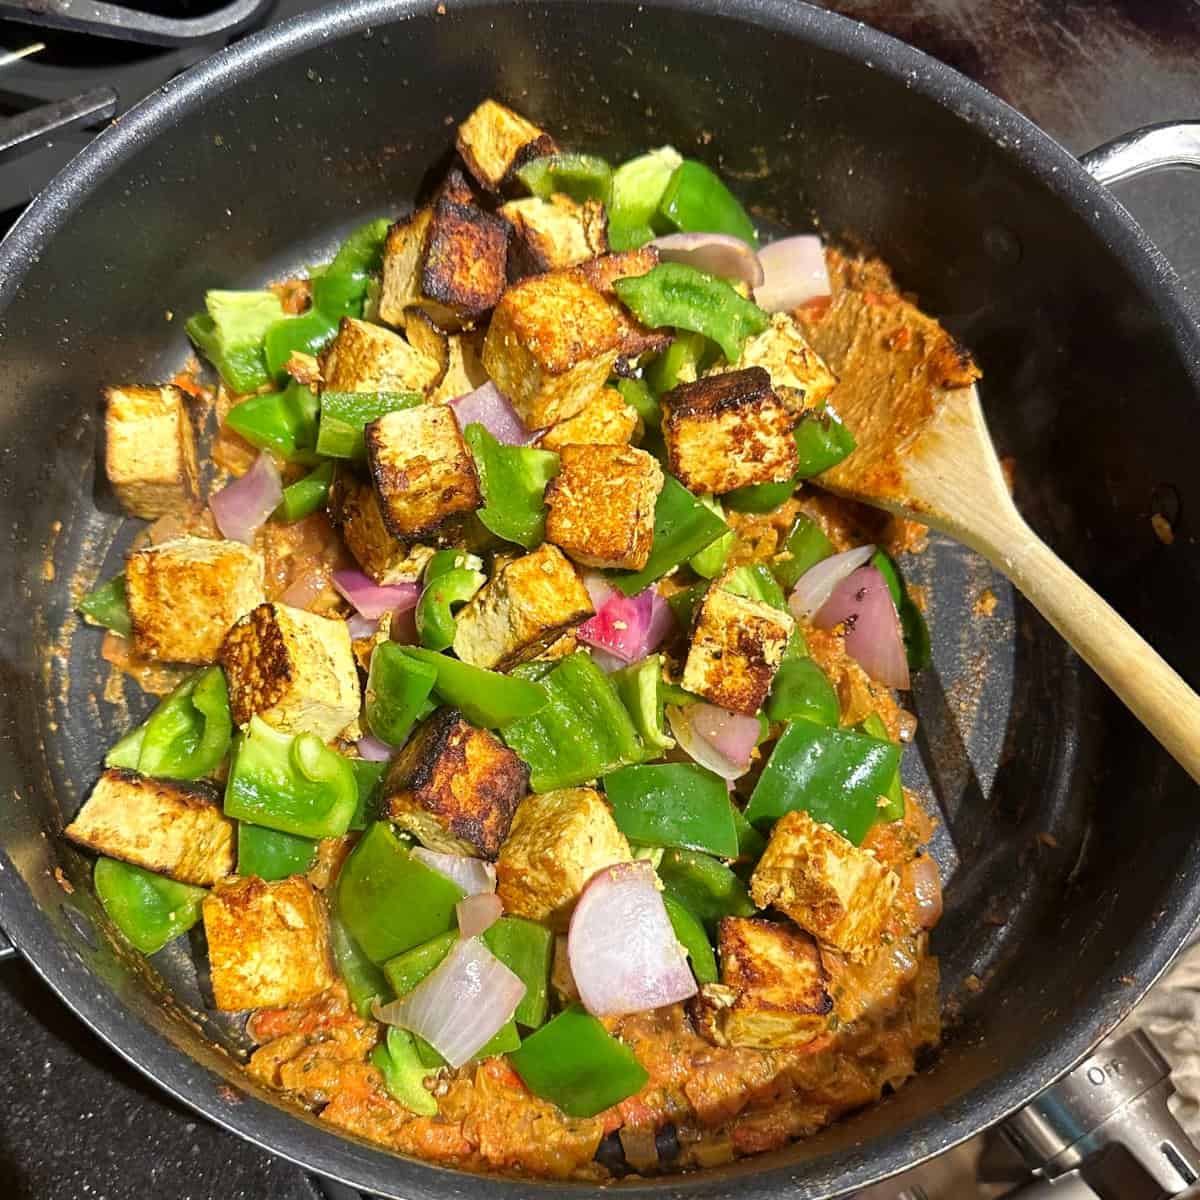 Tofu cubes and bell peppers added to sauce in pan.